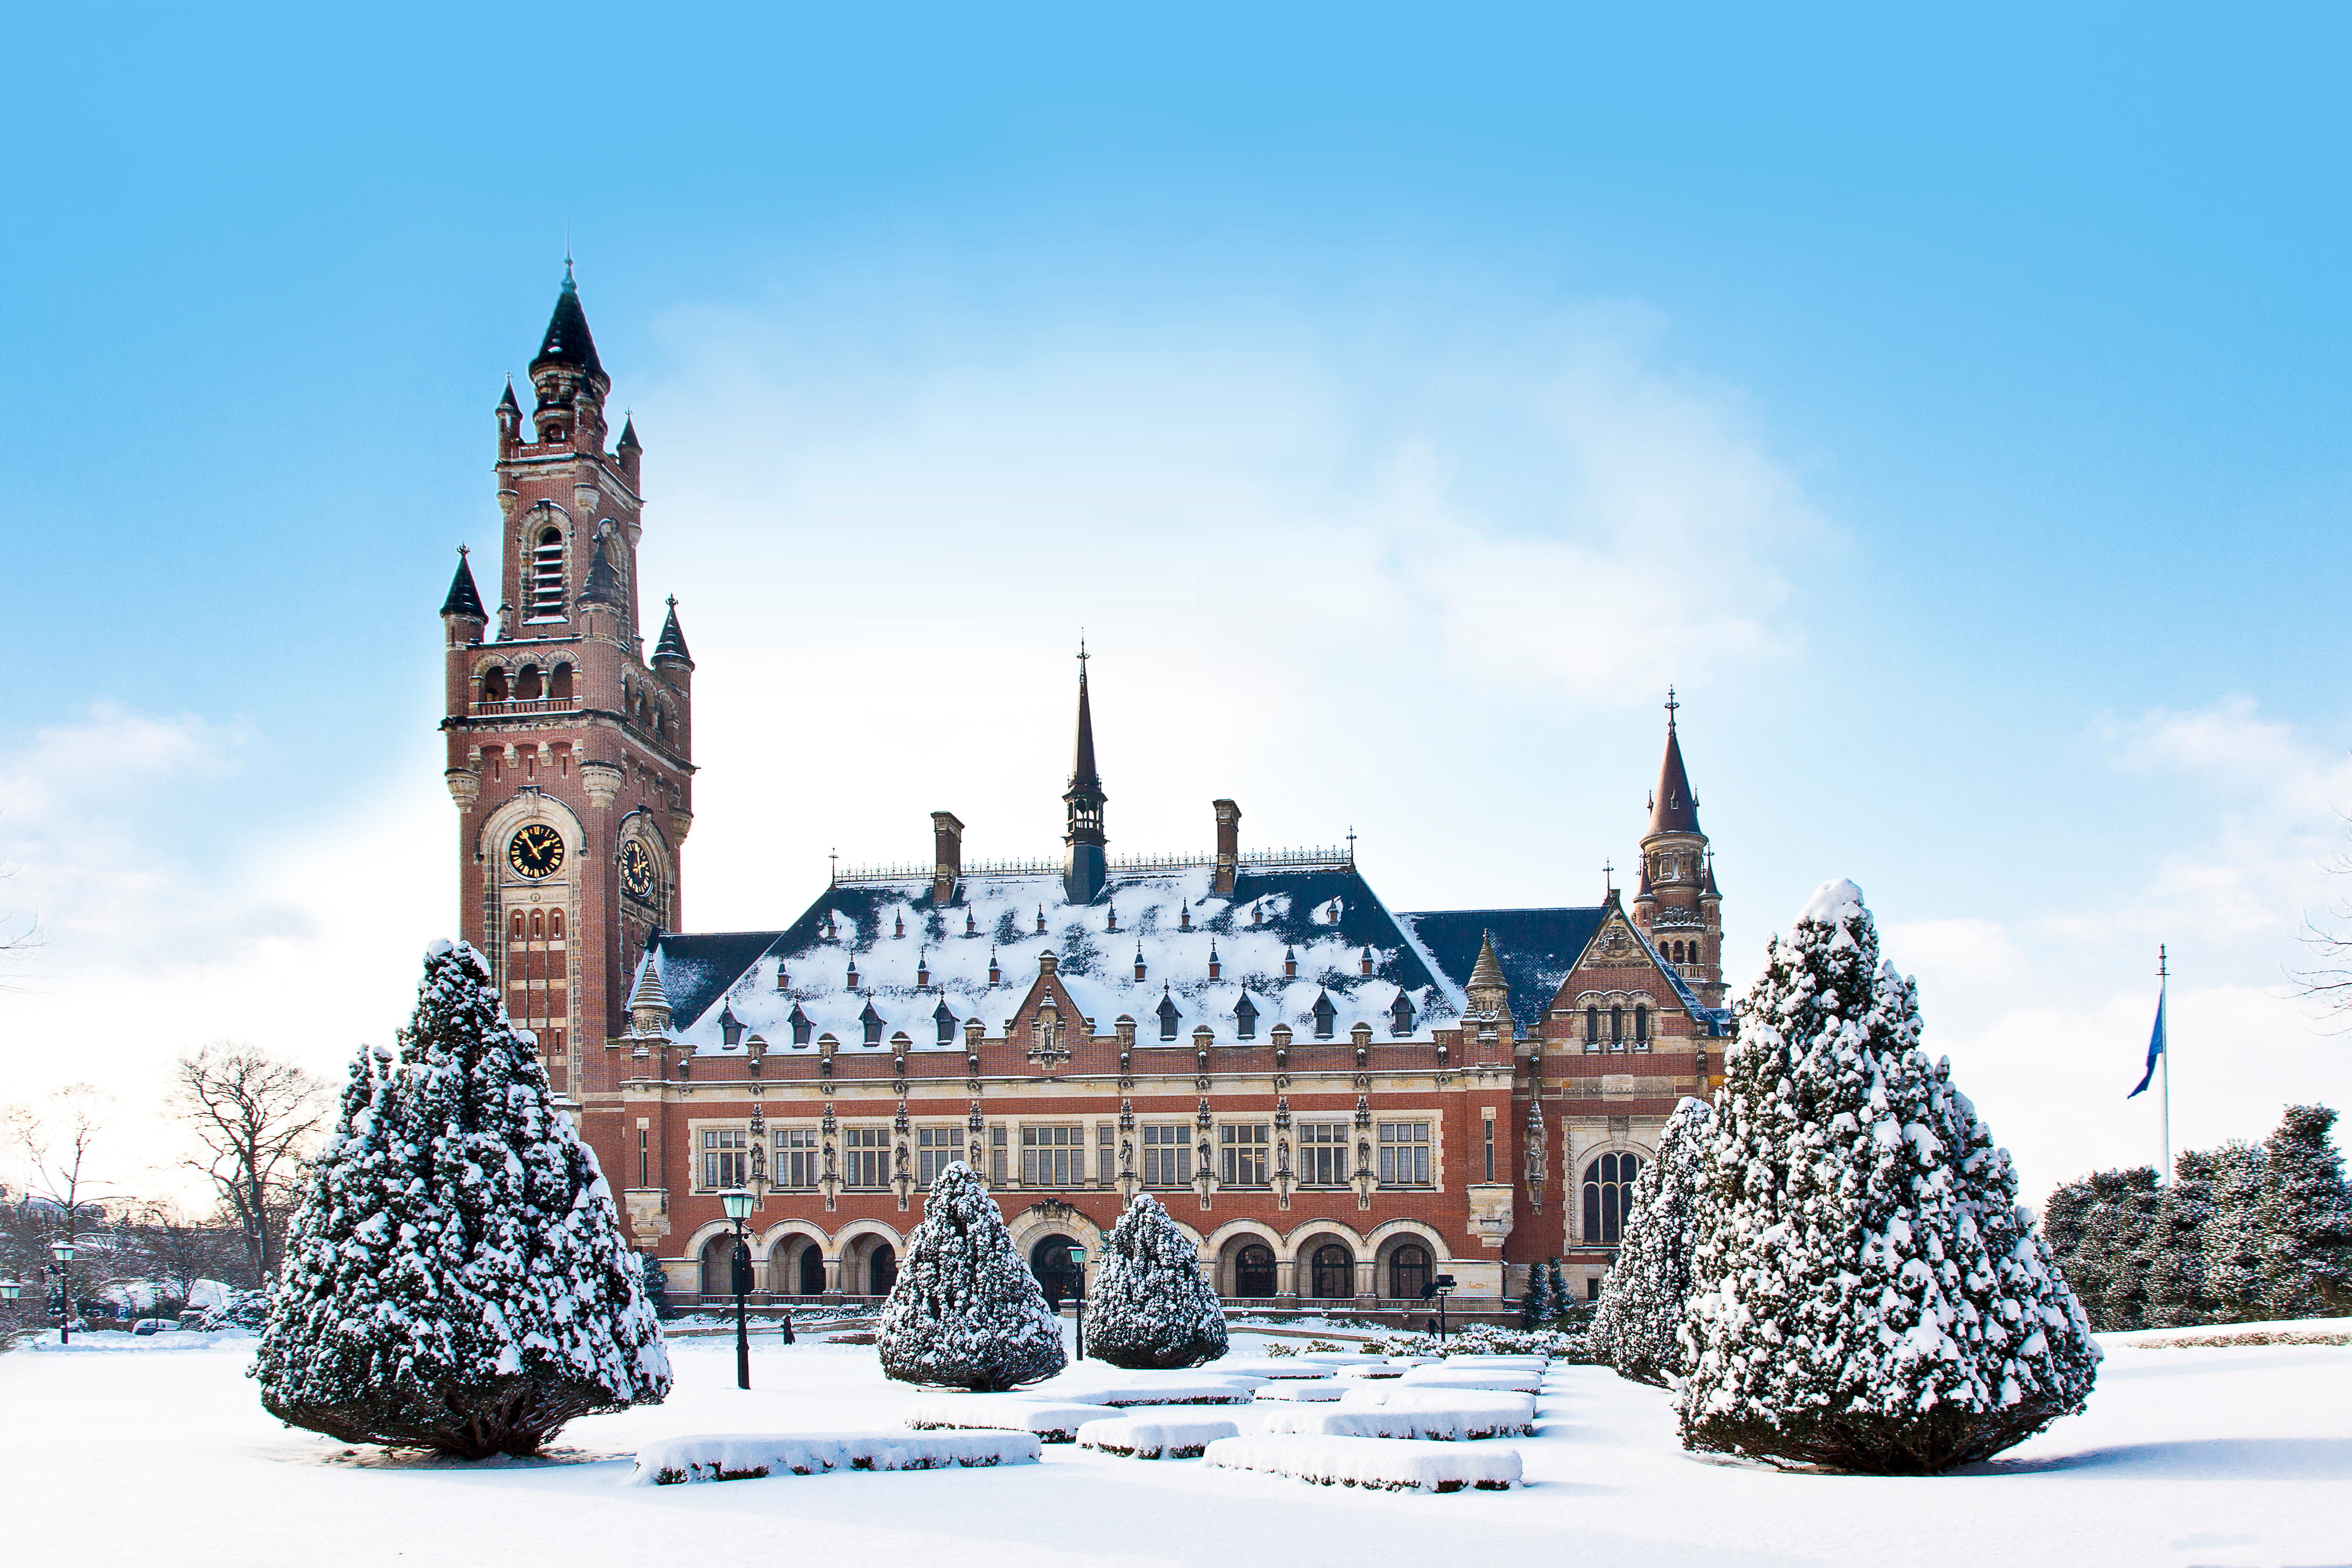 The Hague Palace during winter